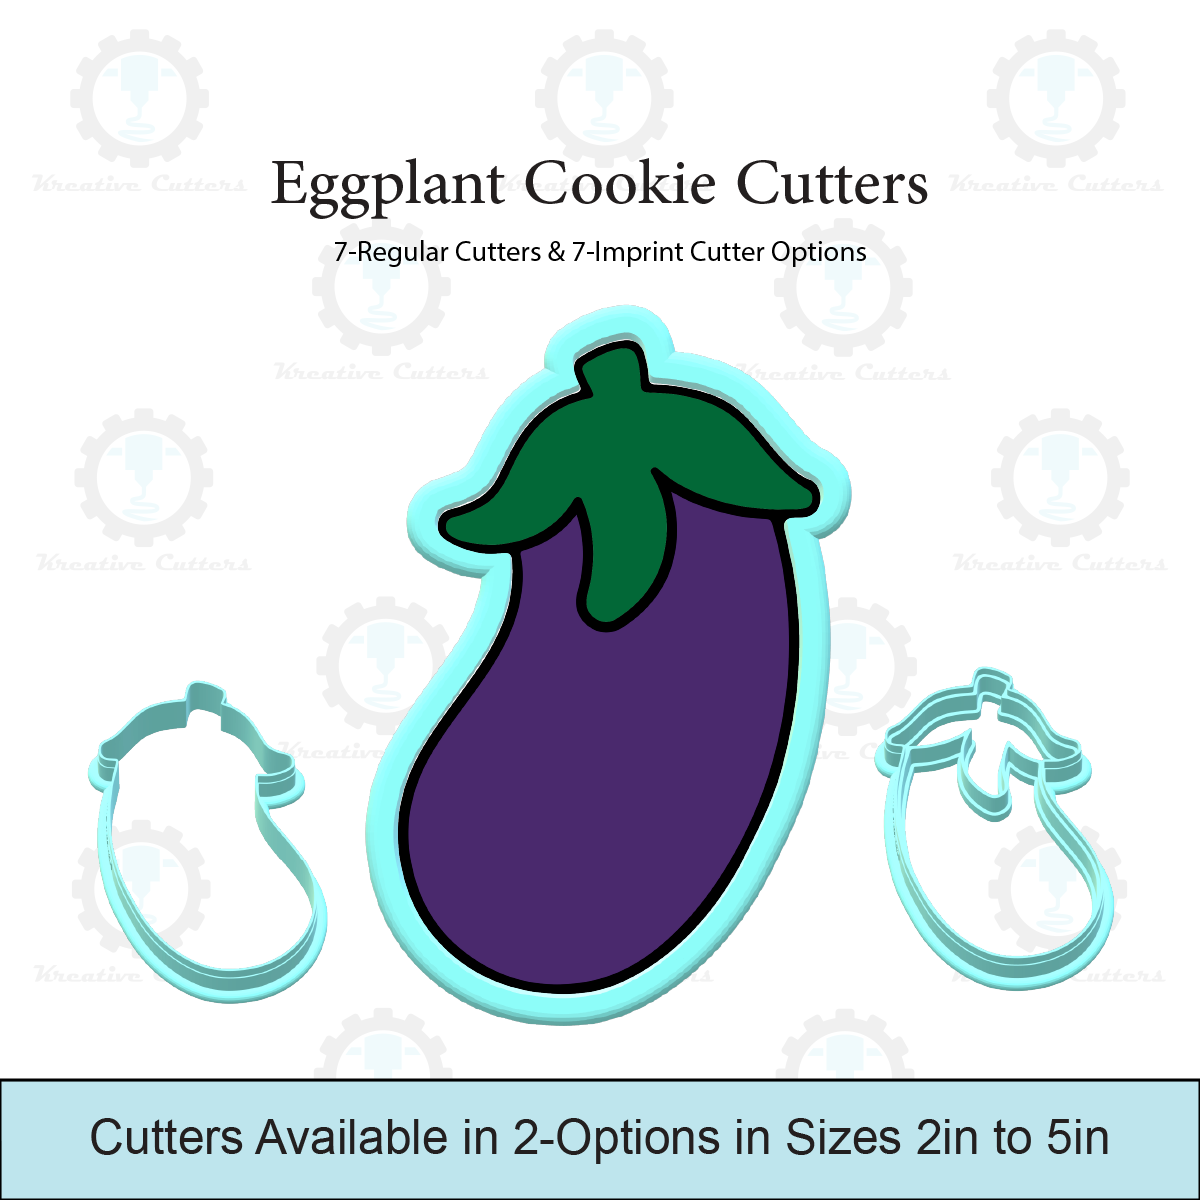 Eggplant Cookie Cutters | With Imprint Cutter Option